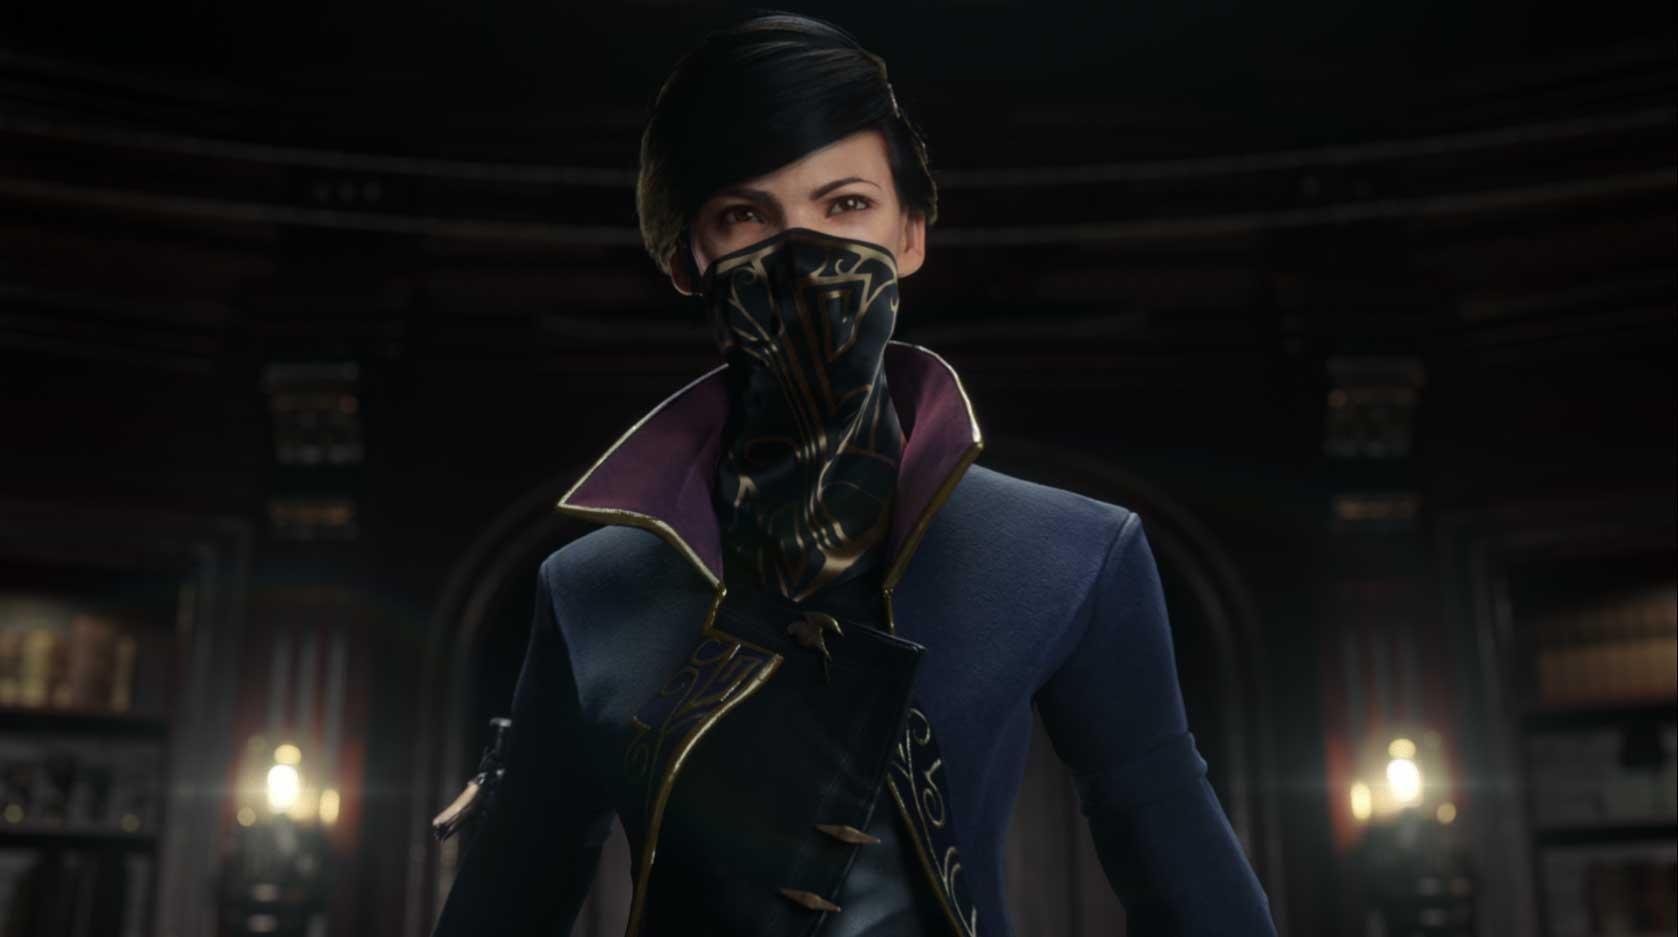 dishonored 2 safe combinations ademire